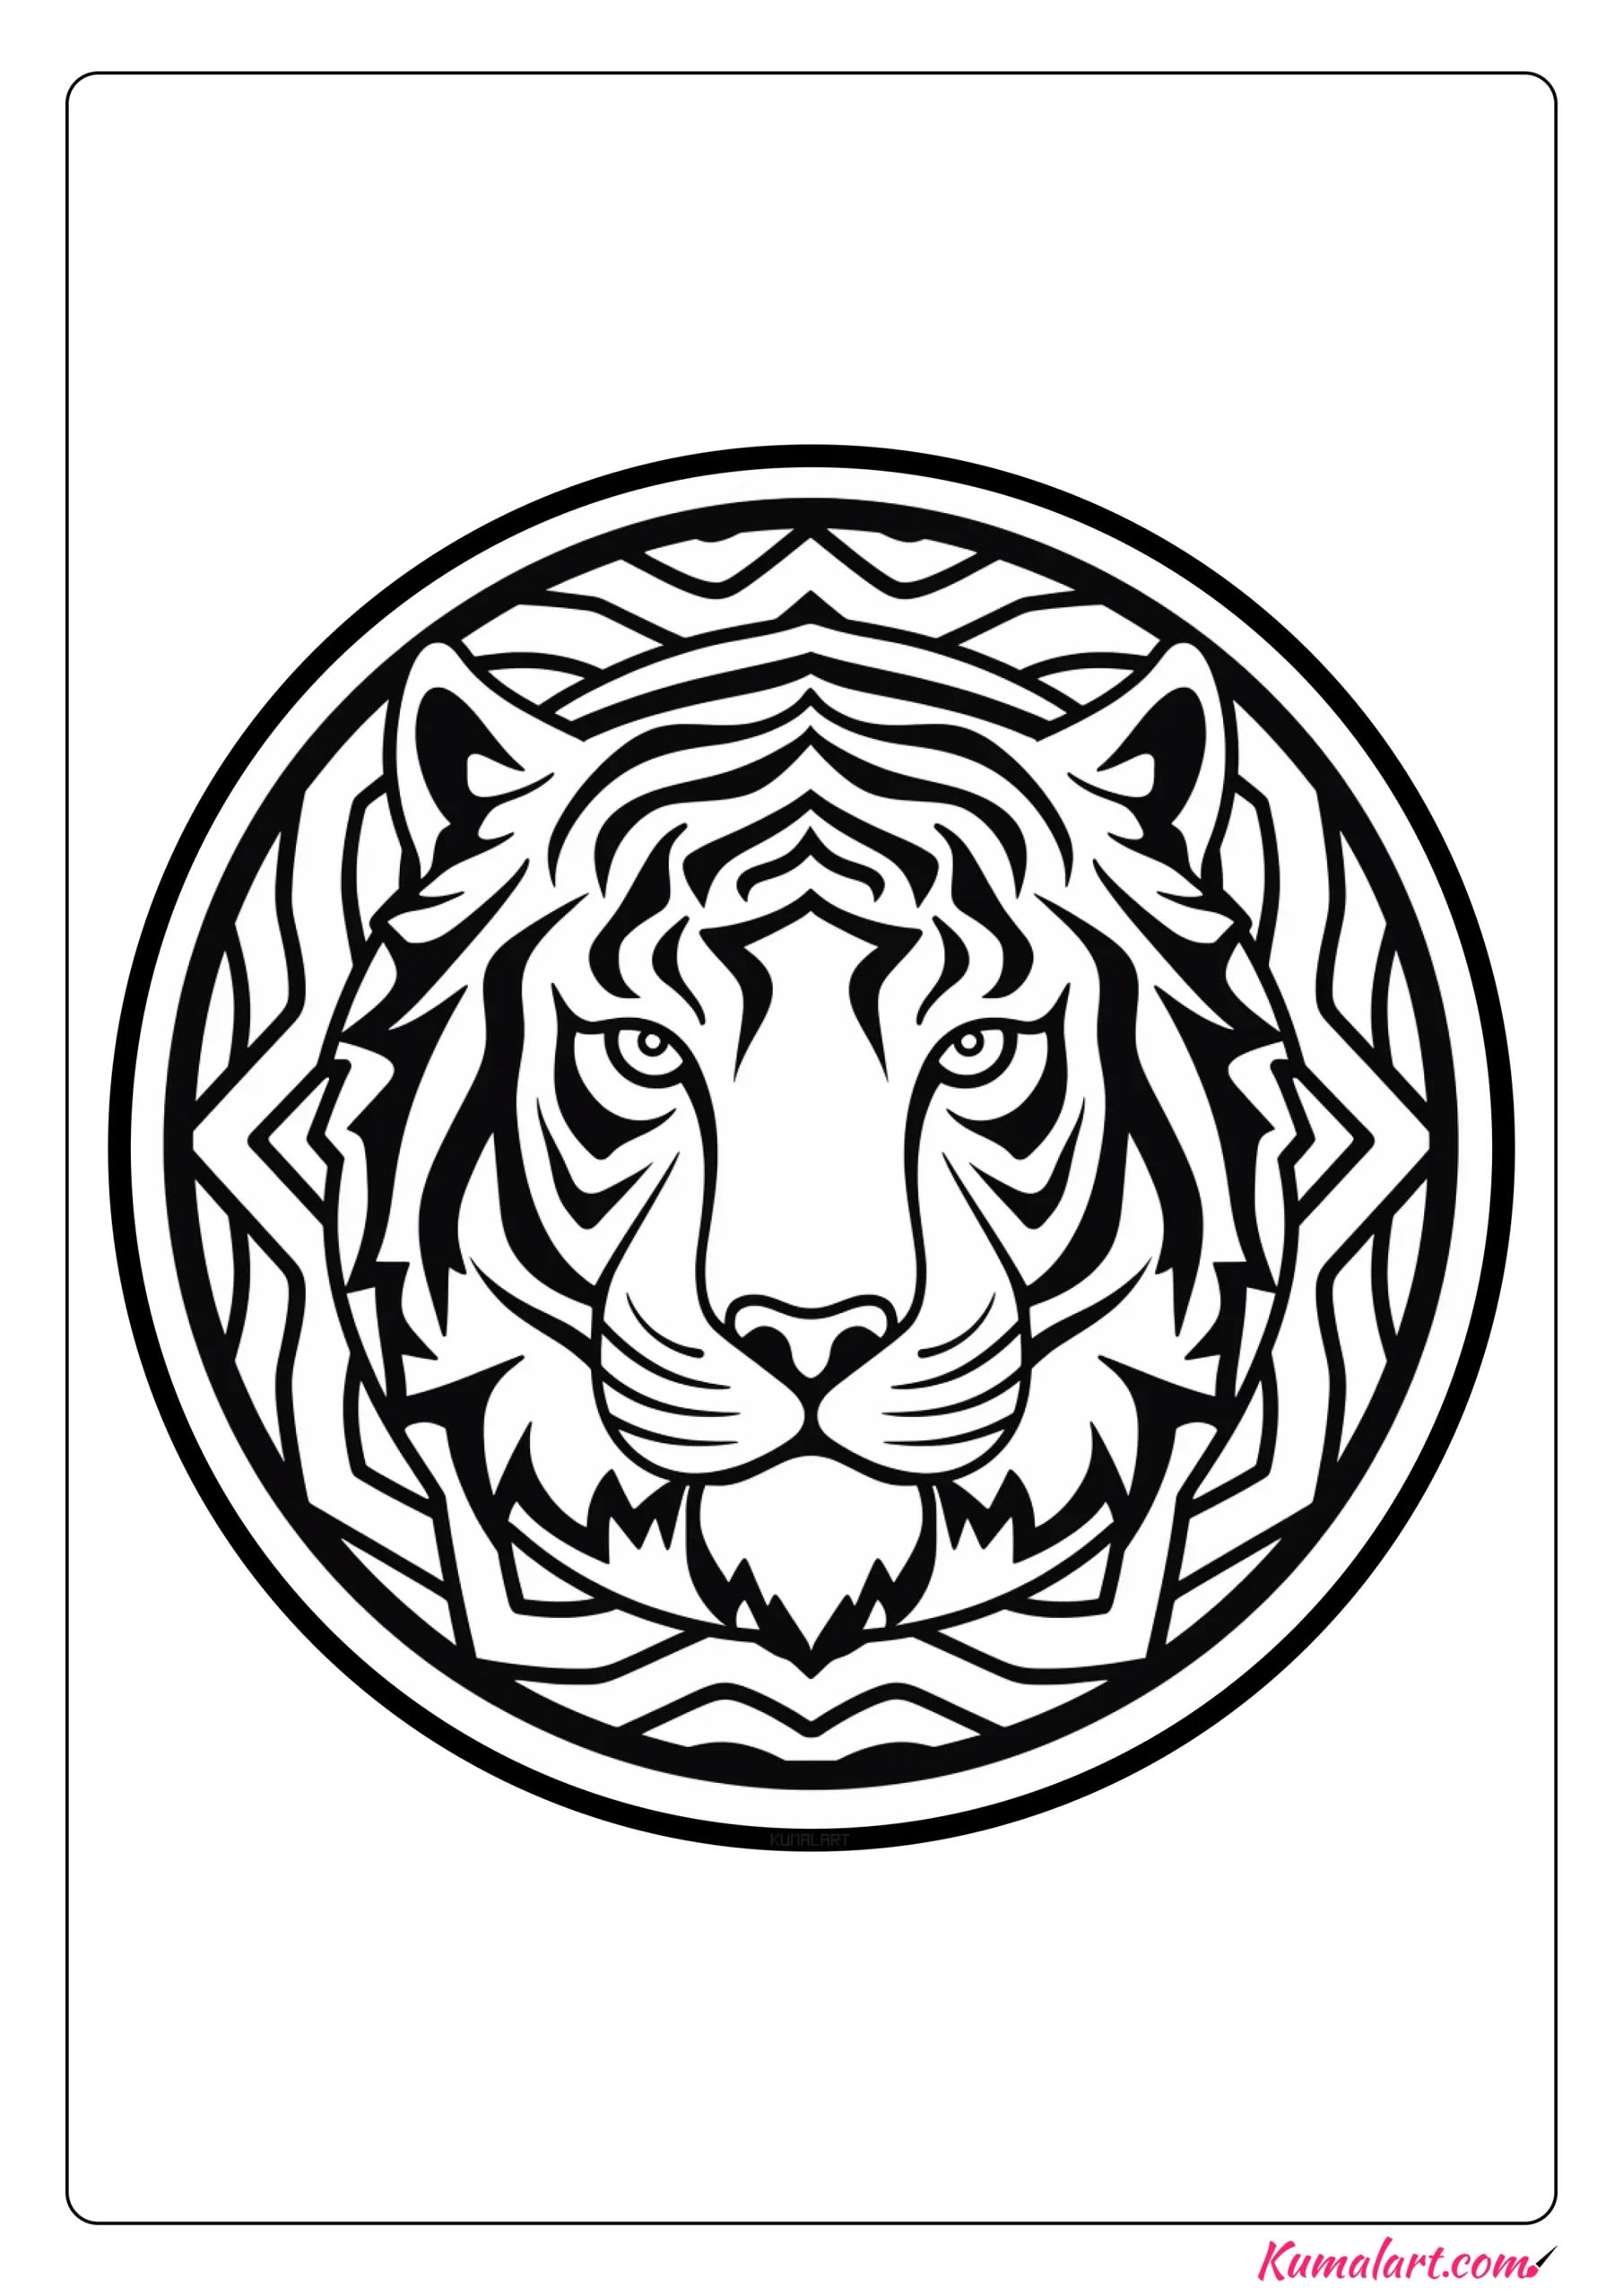 Alice the Tiger Coloring Page